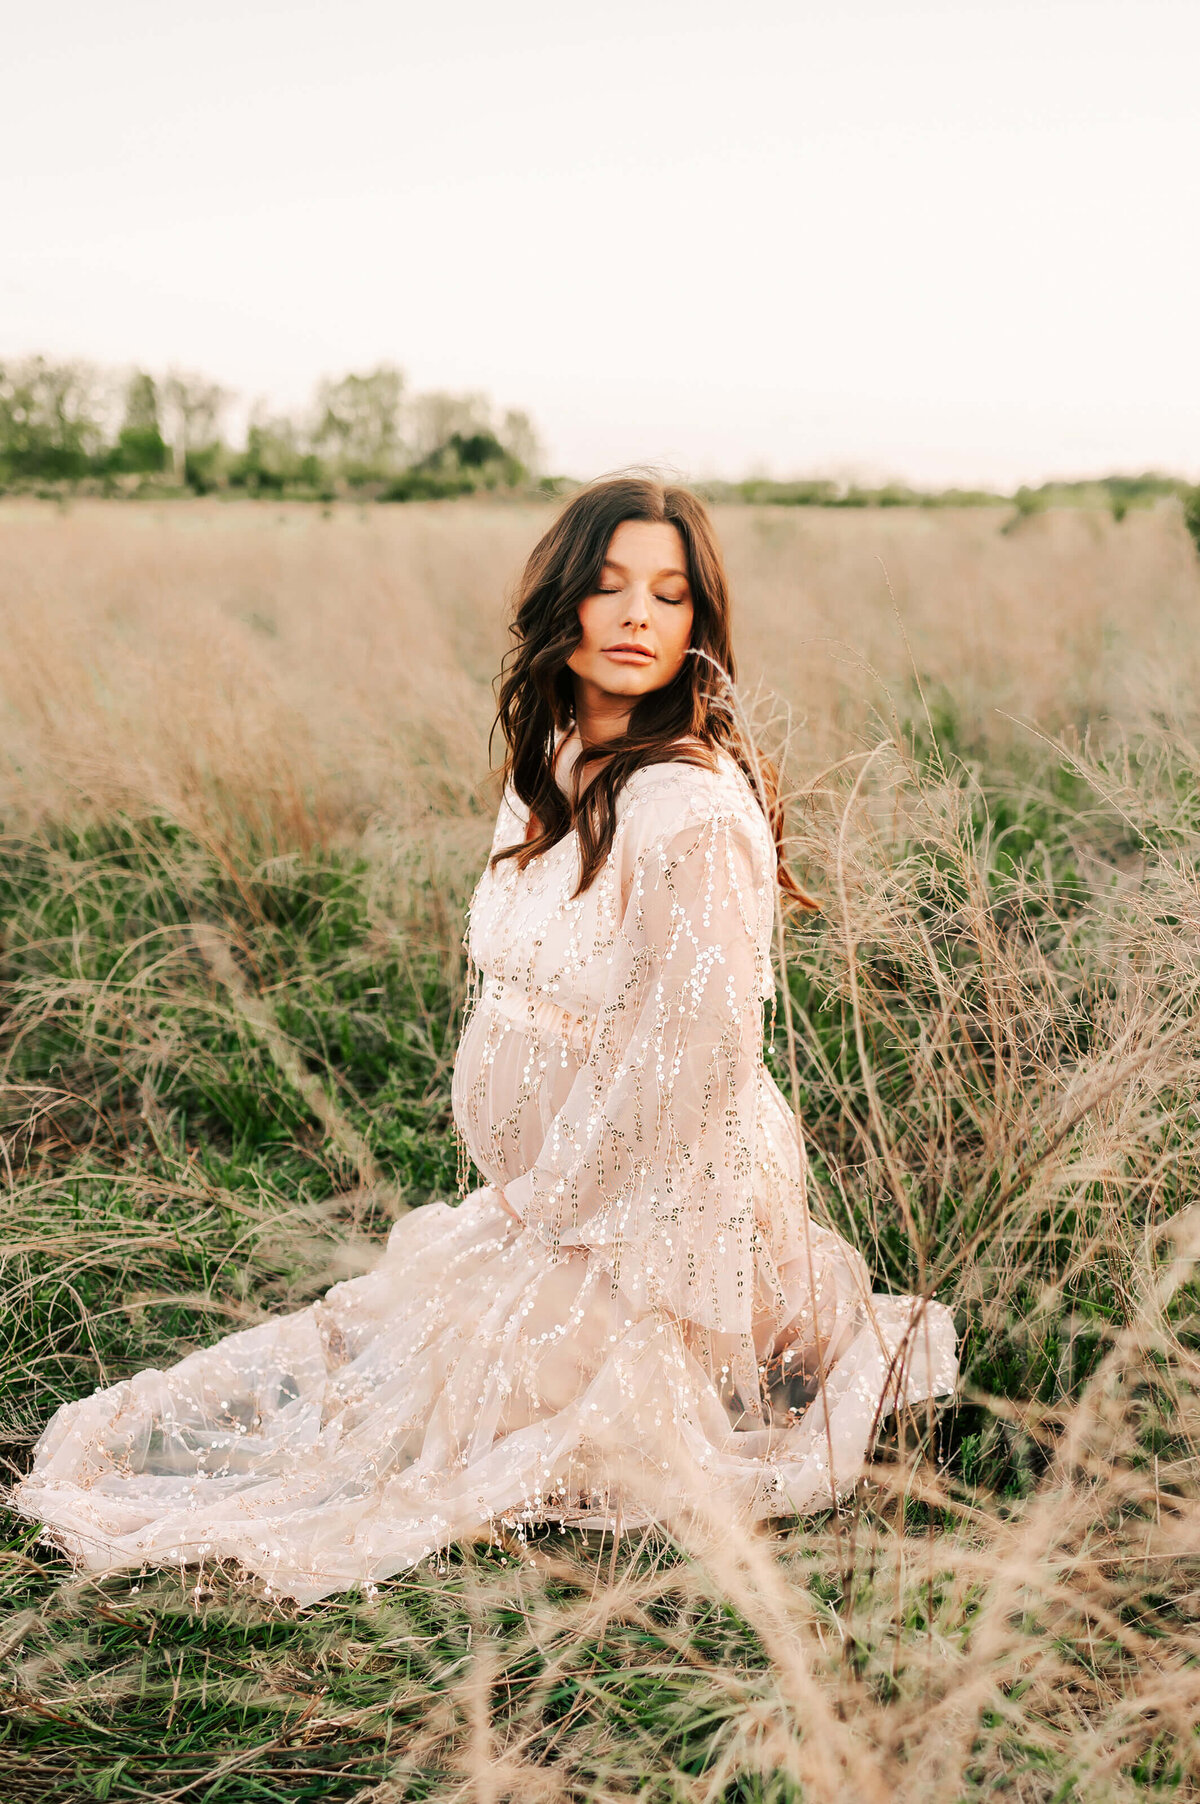 Springfield Mo maternity photographer captures pregnant mom kneeling in grass